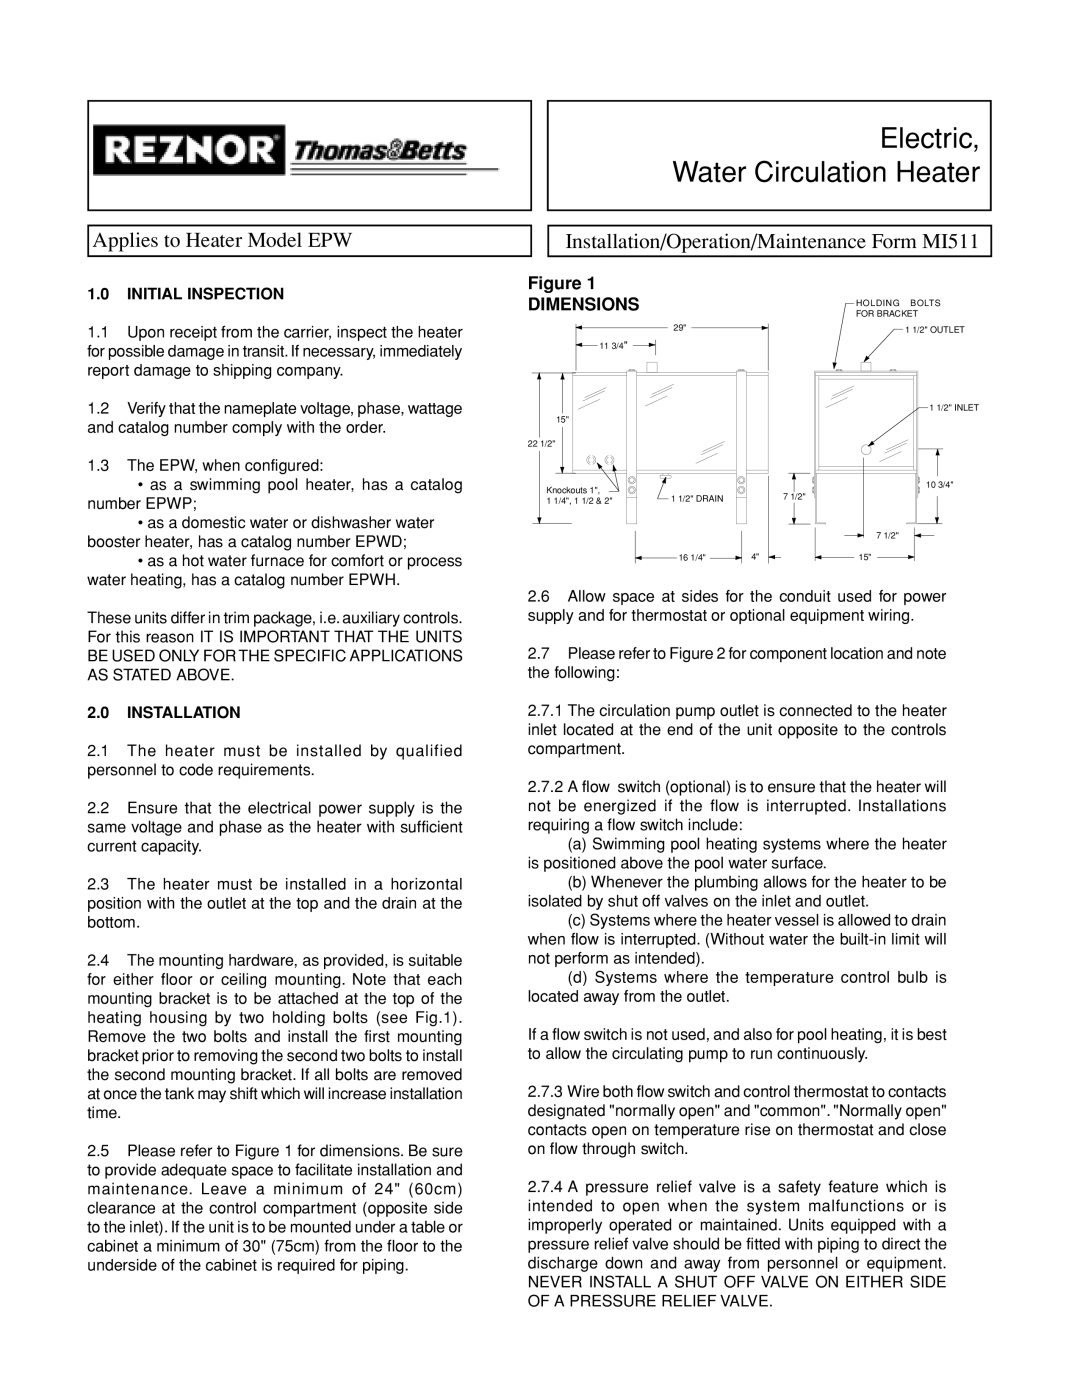 Thomas & Betts dimensions Figure DIMENSIONS, Electric Water Circulation Heater, Applies to Heater Model EPW 